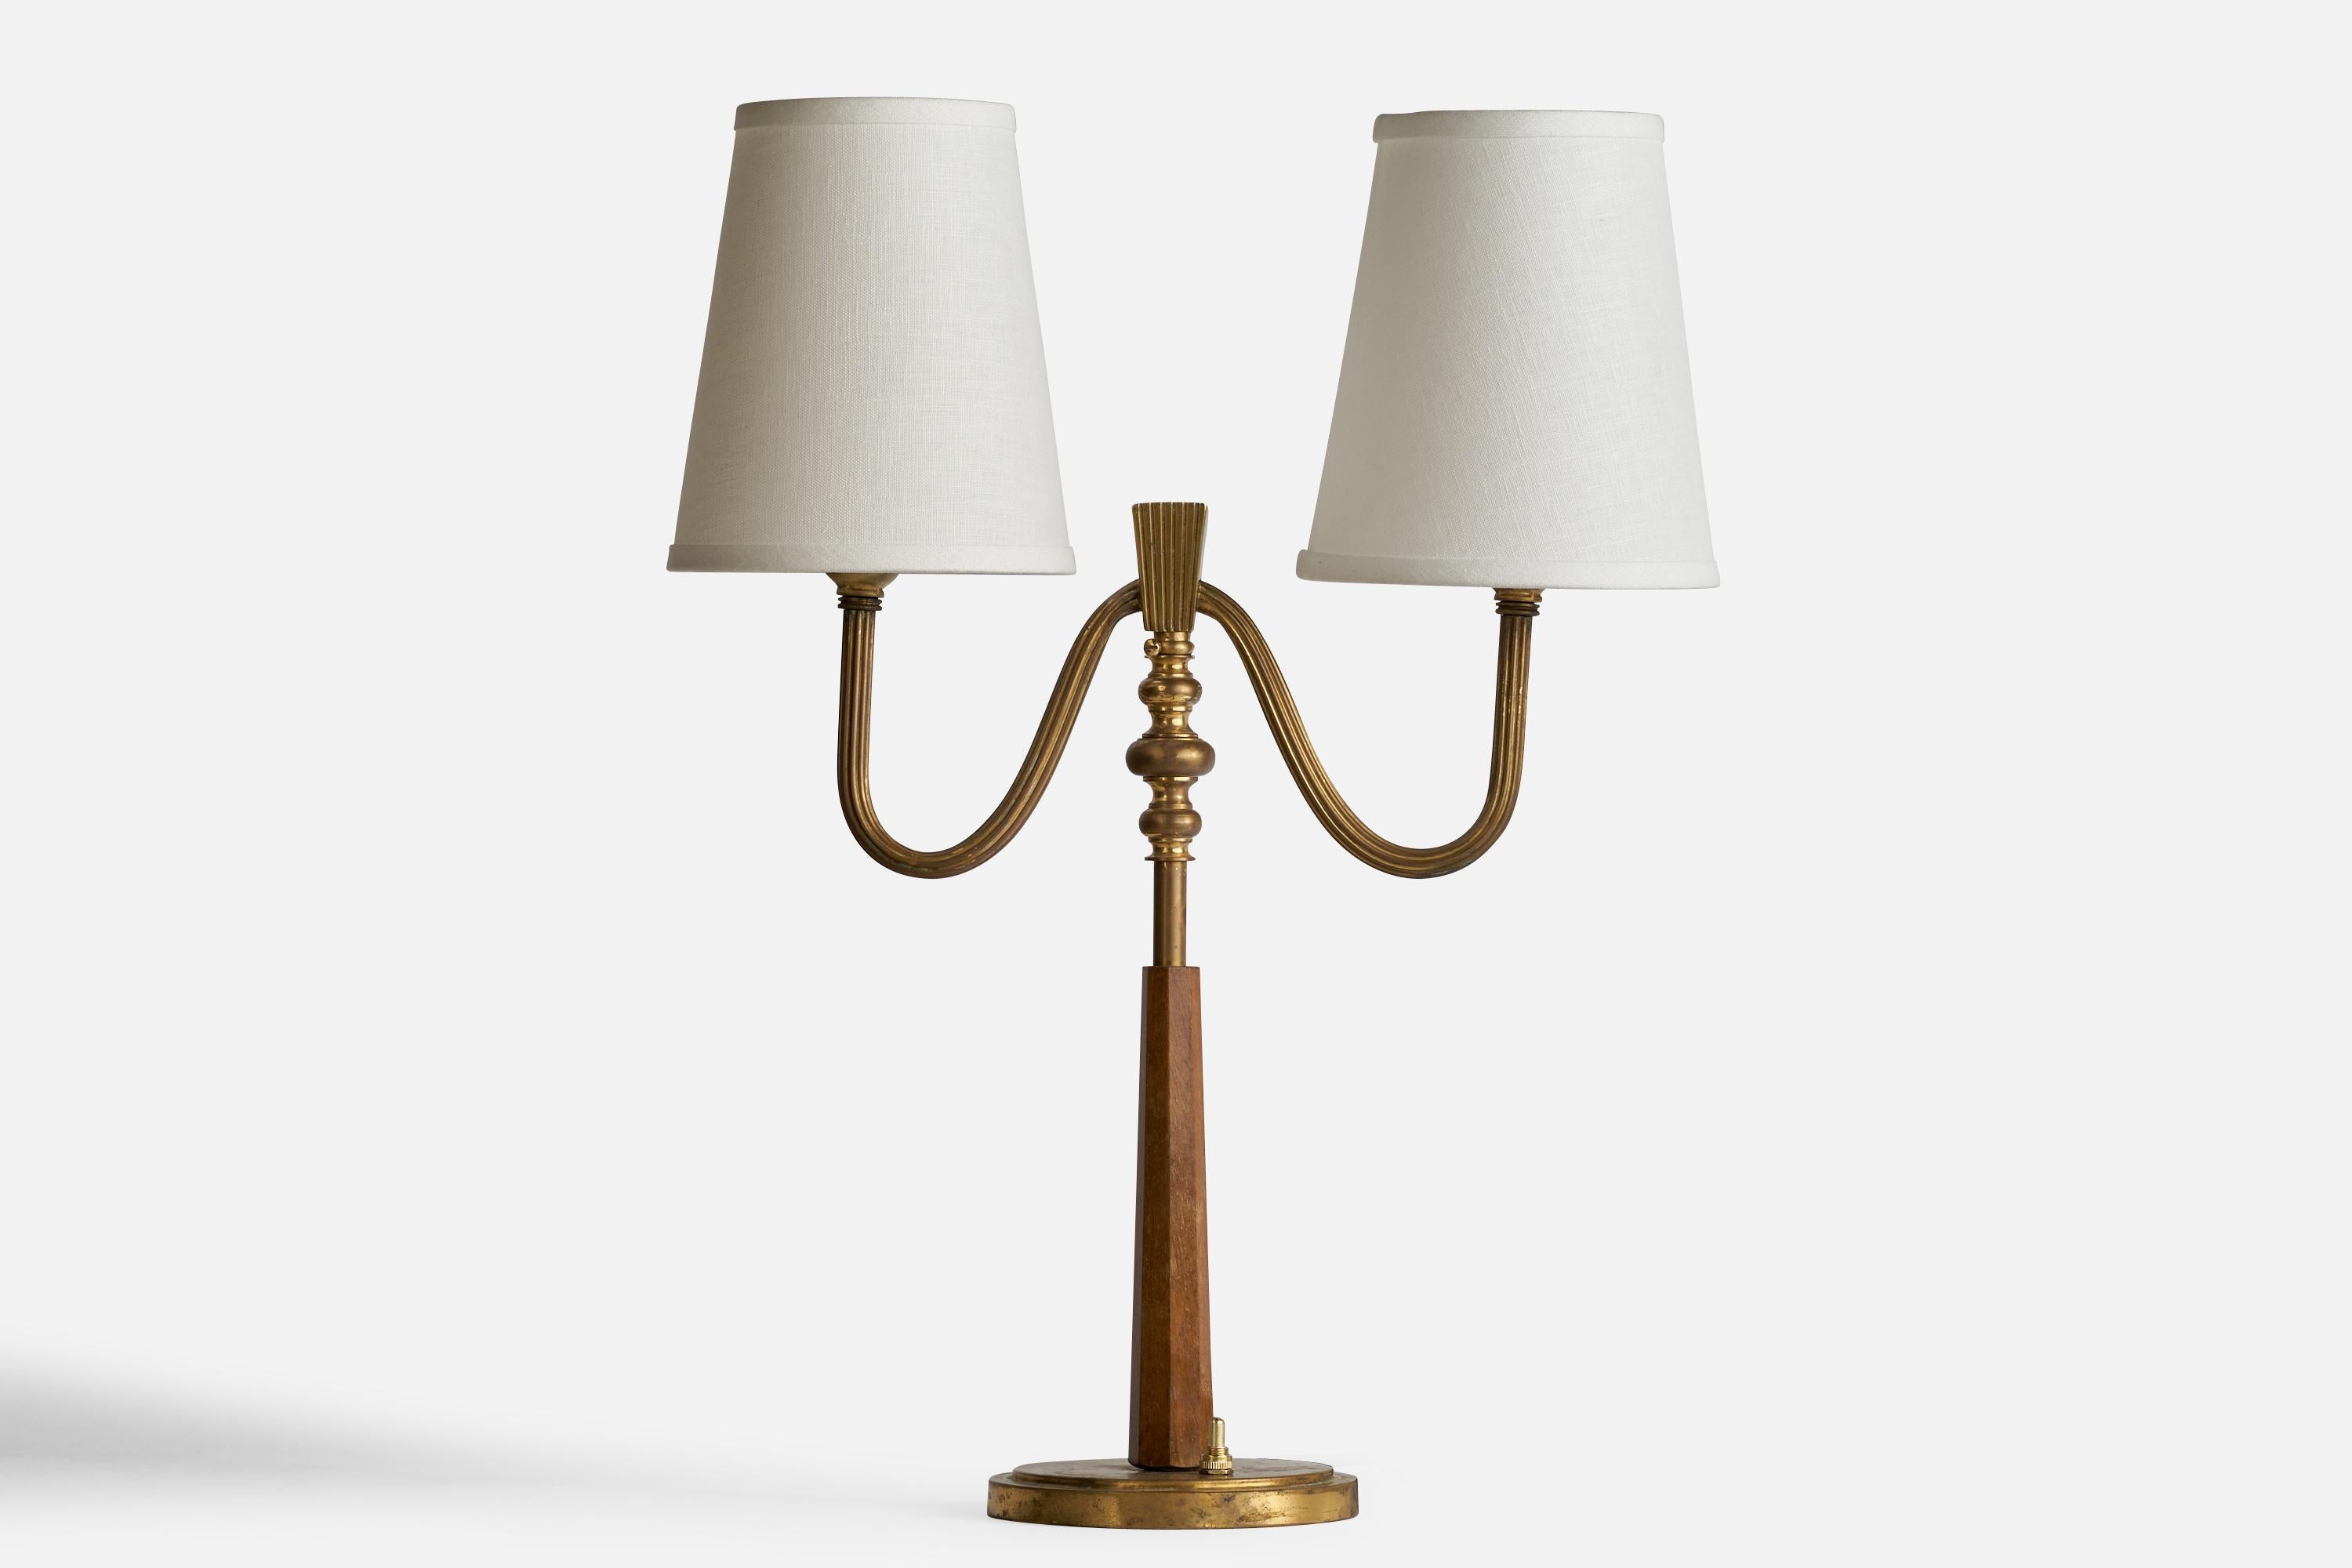 A two-armed brass, stained elm and white fabric table lamp, model 15455, designed and produced by Böhlmarks, Sweden, 1930s.

Dimensions of Lamp (inches): 16” H x 5.5” Diameter
Dimensions of Shade (inches): 4”  Top Diameter x 6” Bottom Diameter x 7”